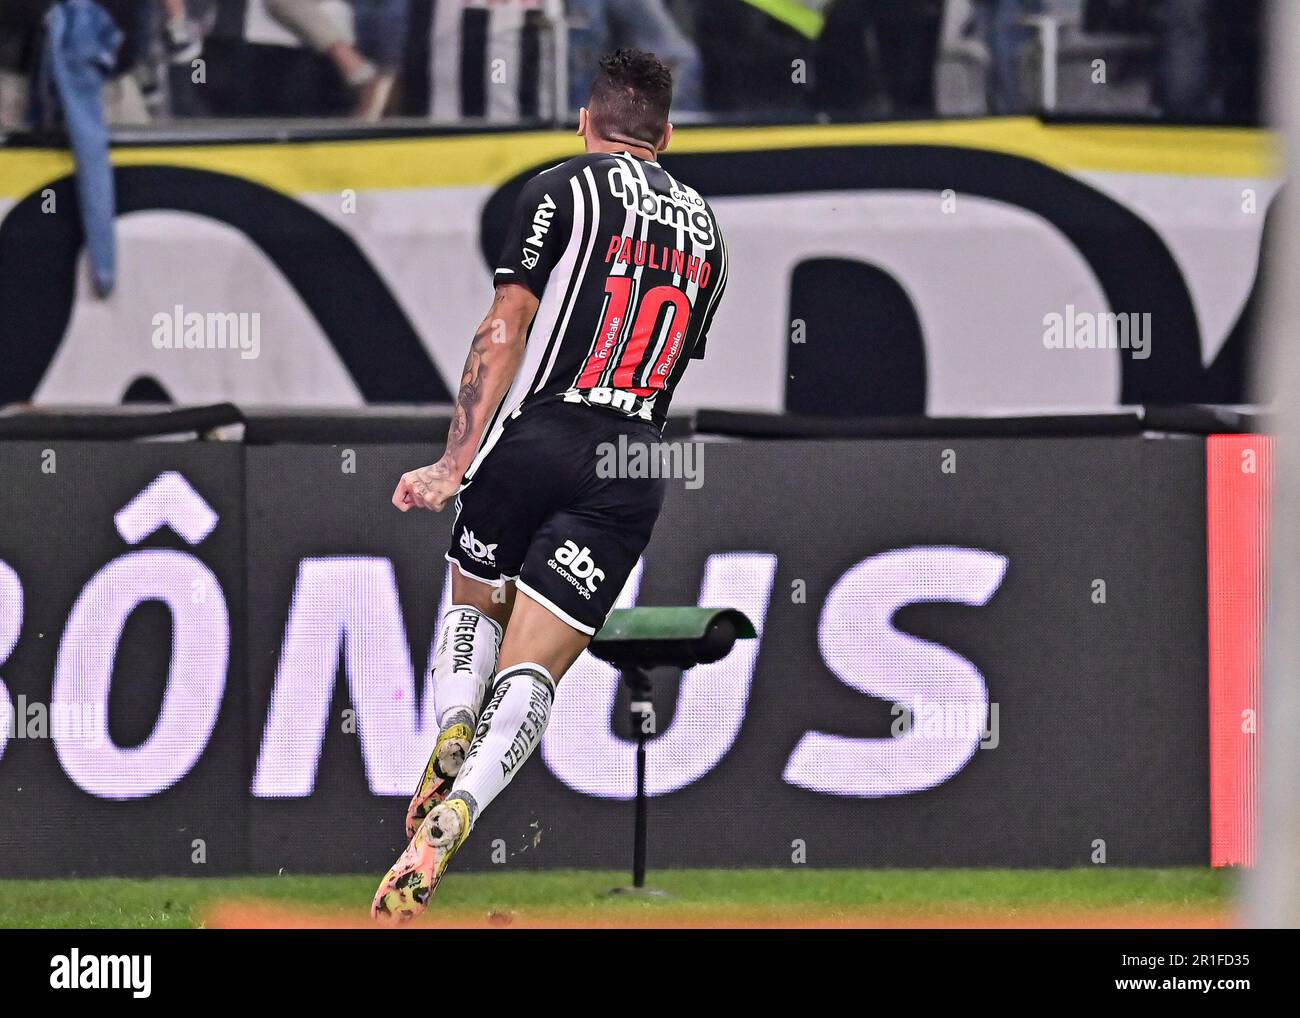 Belo Horizonte, Brazil. 13th May, 2023. Paulinho of Atletico Mineiro, celebrates after scores his goal during the match between Atletico Mineiro and Internacional, for the Brazilian Serie A 2023, at Mineirao Stadium, in Belo Horizonte on May 13. Photo: Gledston Tavares/DiaEsportivo/Alamy Live News Credit: DiaEsportivo/Alamy Live News Stock Photo